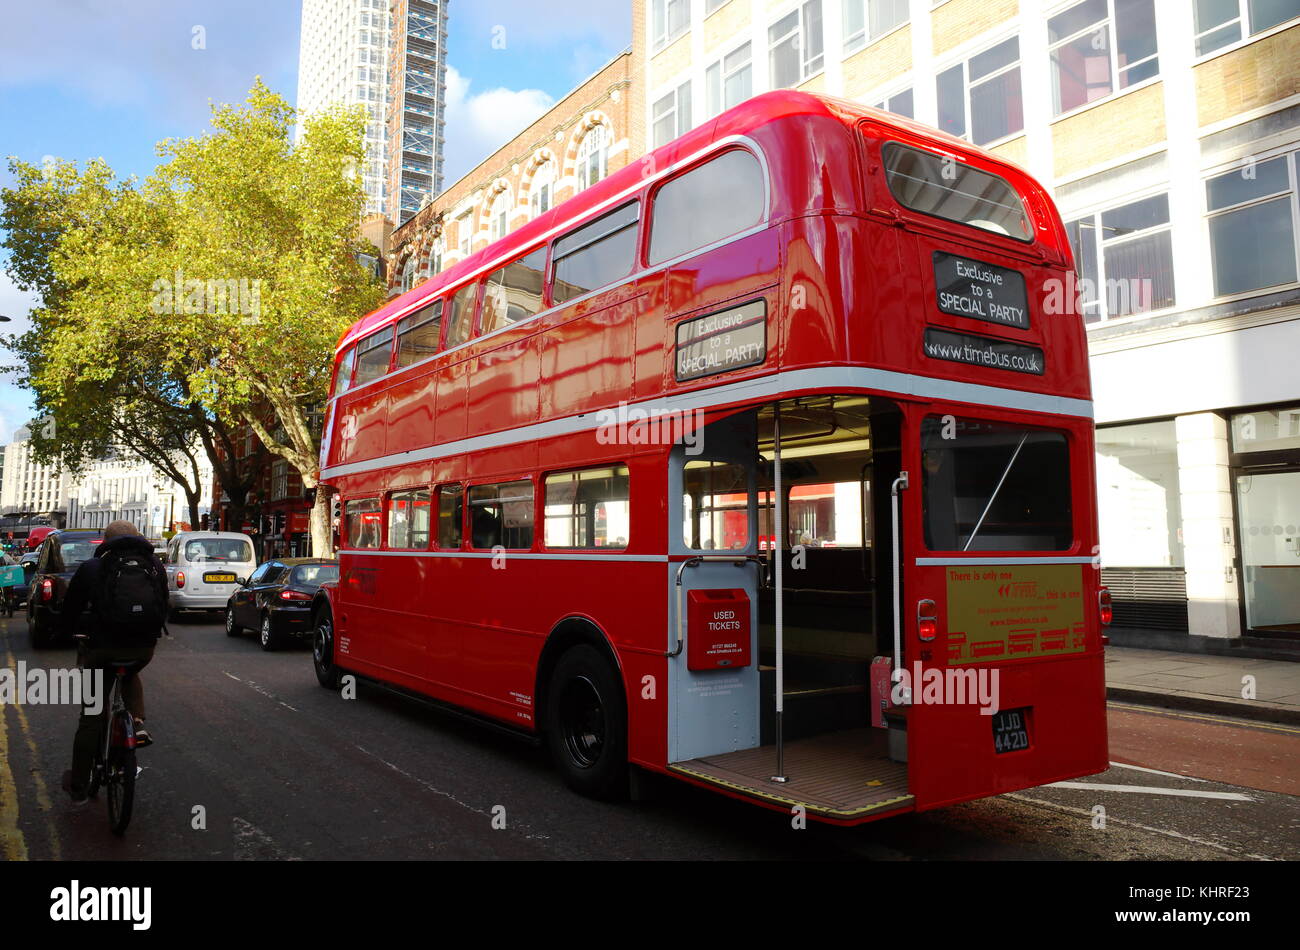 Route Master red double decker bus in London, England Stock Photo